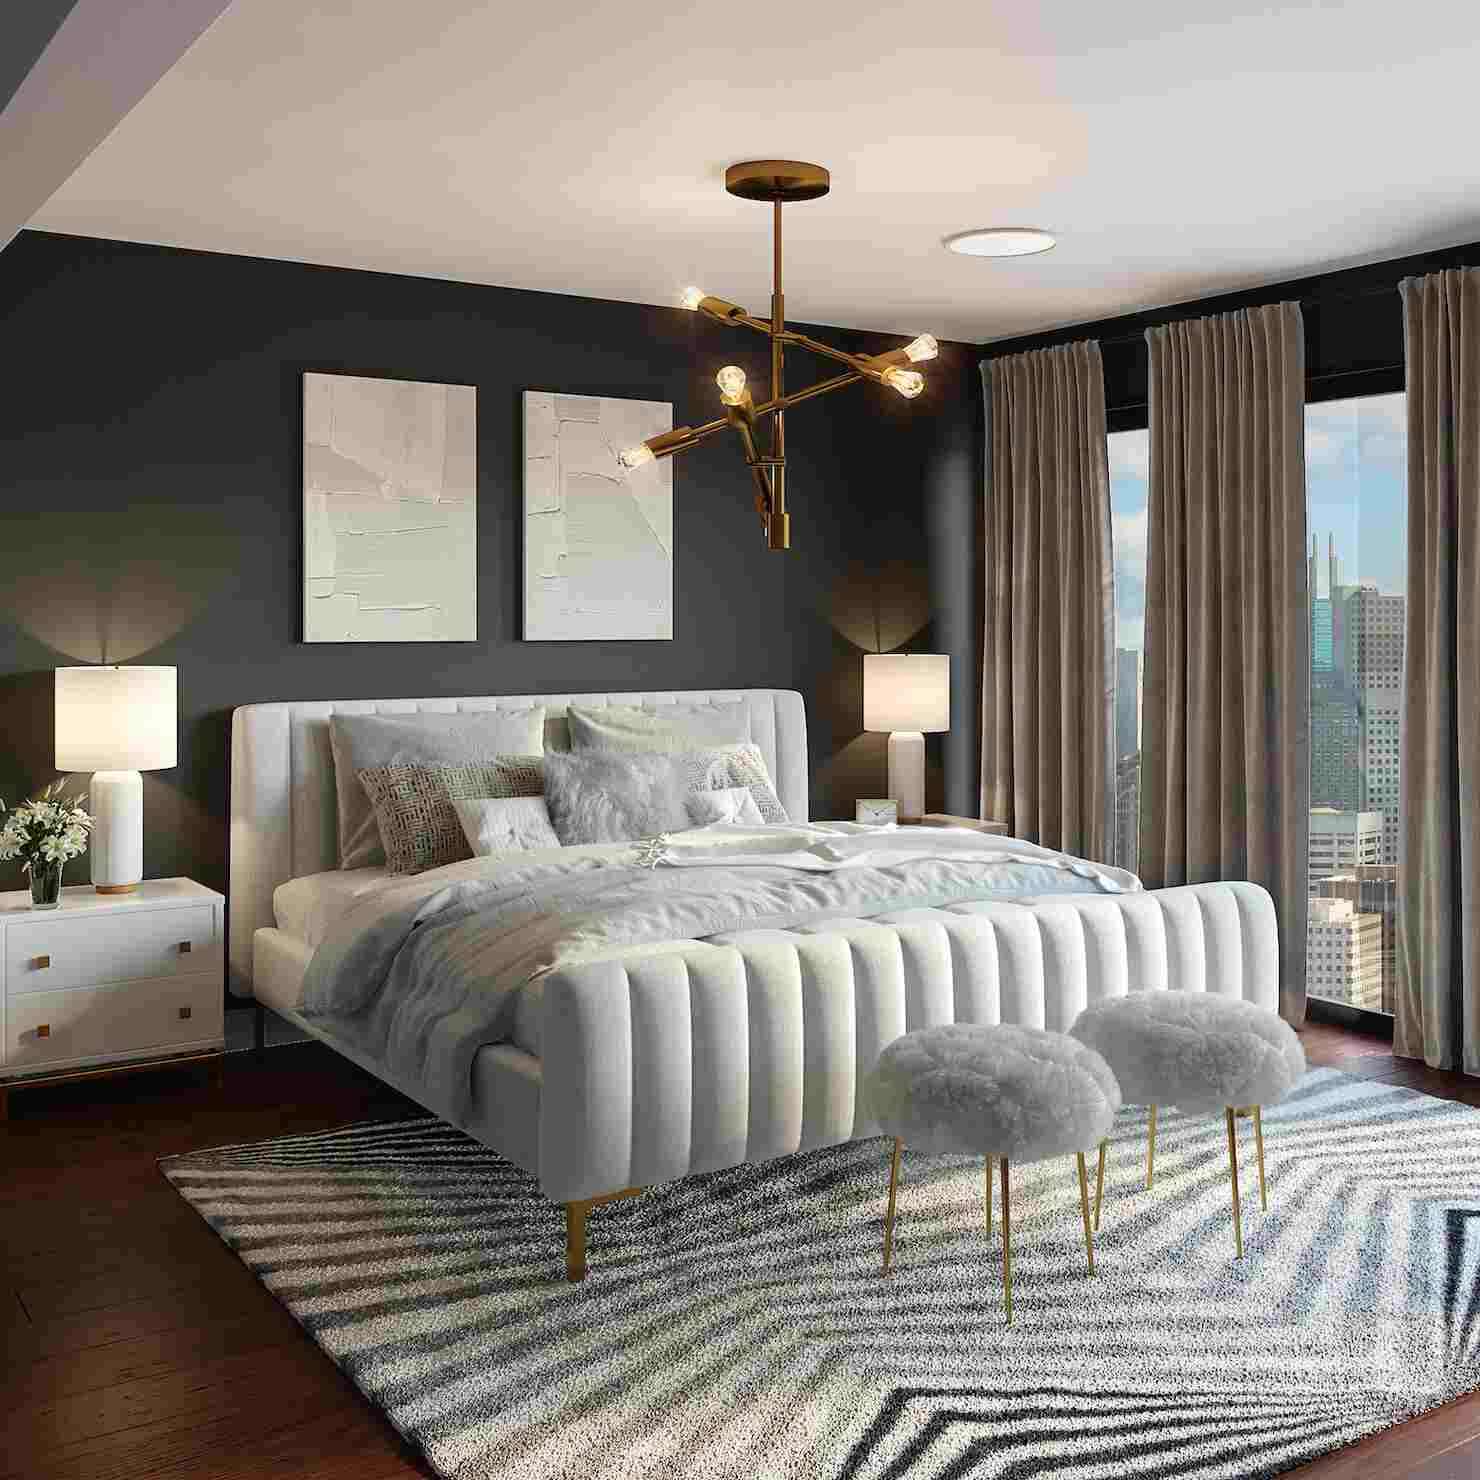 A stylish bedroom with black walls and white and gray bedding